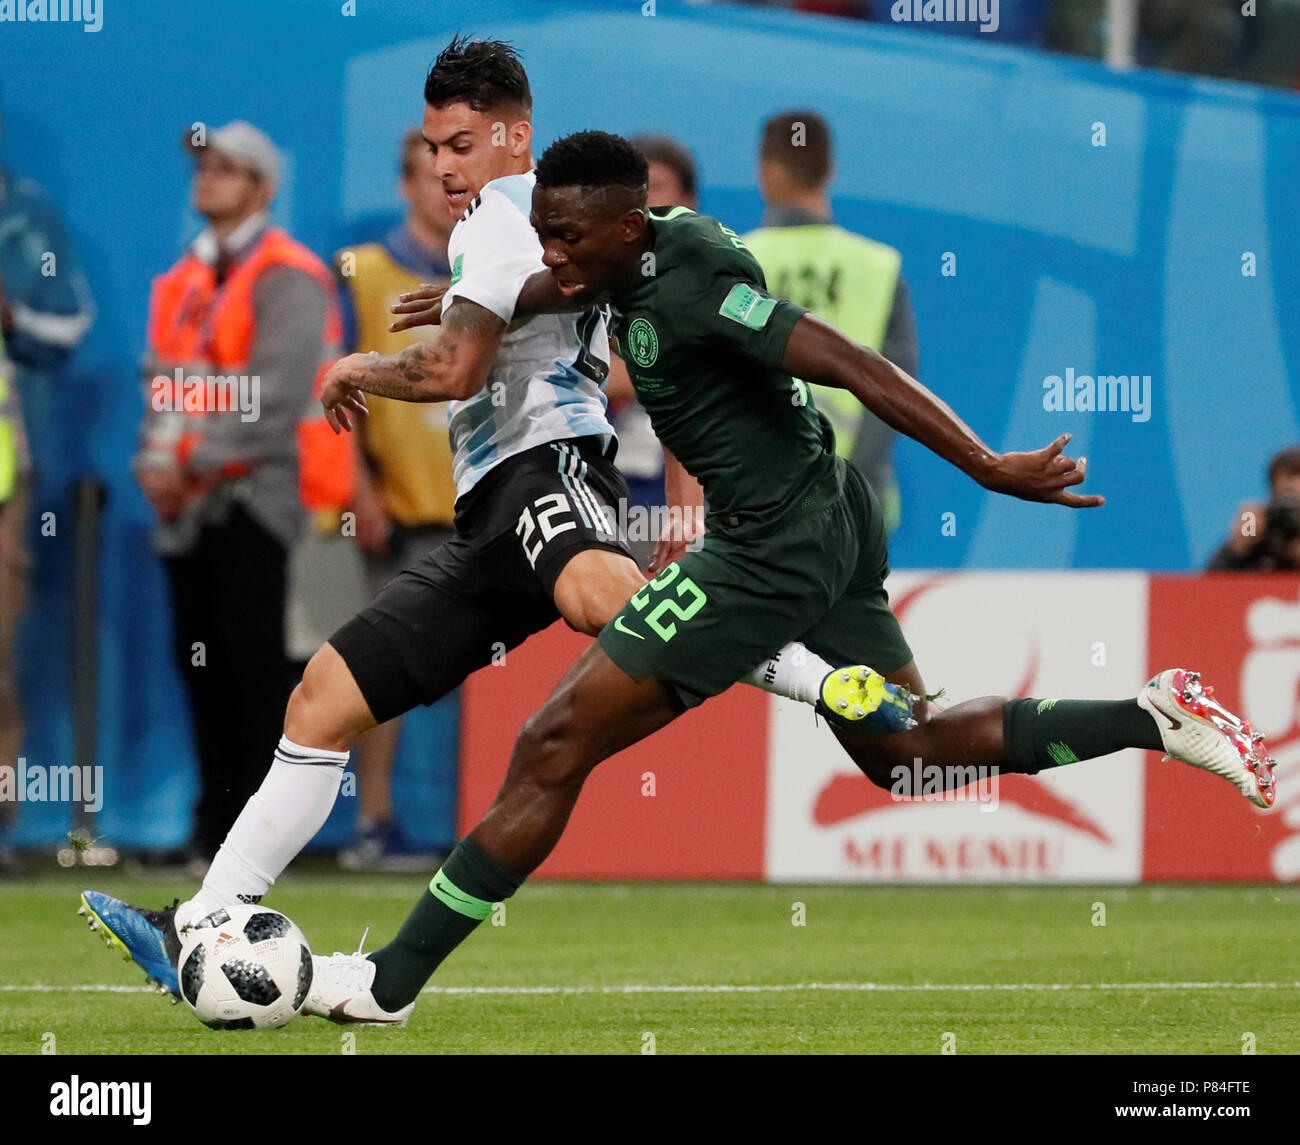 SAINT PETERSBURG, RUSSIA - JUNE 26: Kenneth Omeruo (R) of Nigeria national team and Cristian Pavon of Argentina national team vie for the ball during the 2018 FIFA World Cup Russia group D match between Nigeria and Argentina at Saint Petersburg Stadium on June 26, 2018 in Saint Petersburg, Russia. (MB Media) Stock Photo